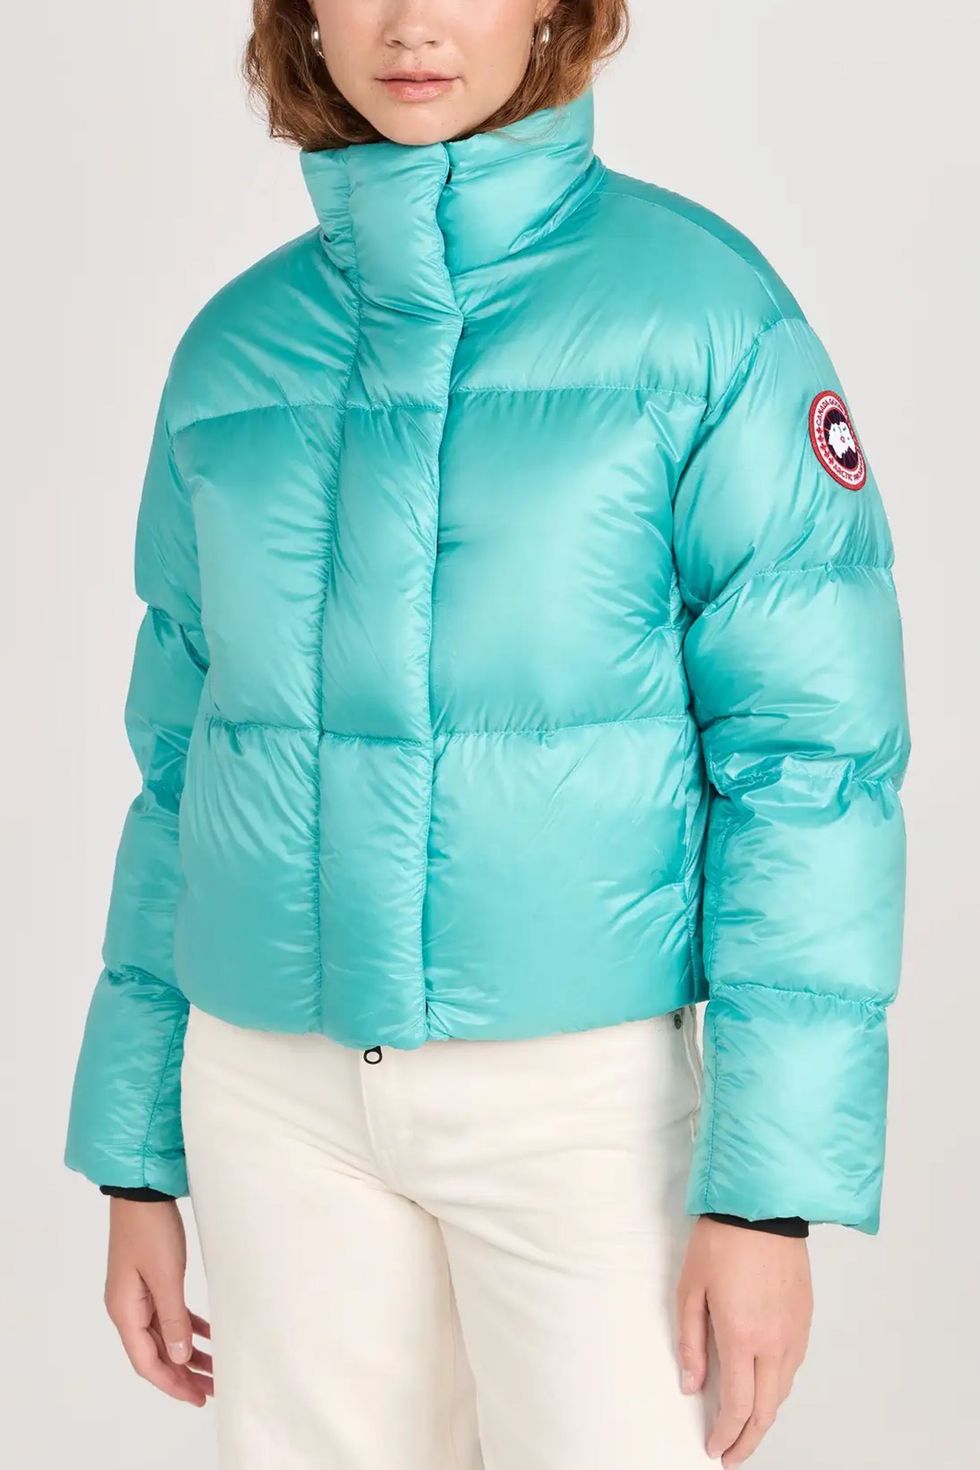 Trend Alert: How To Upgrade Your Outwear With Cropped Puffer Jackets